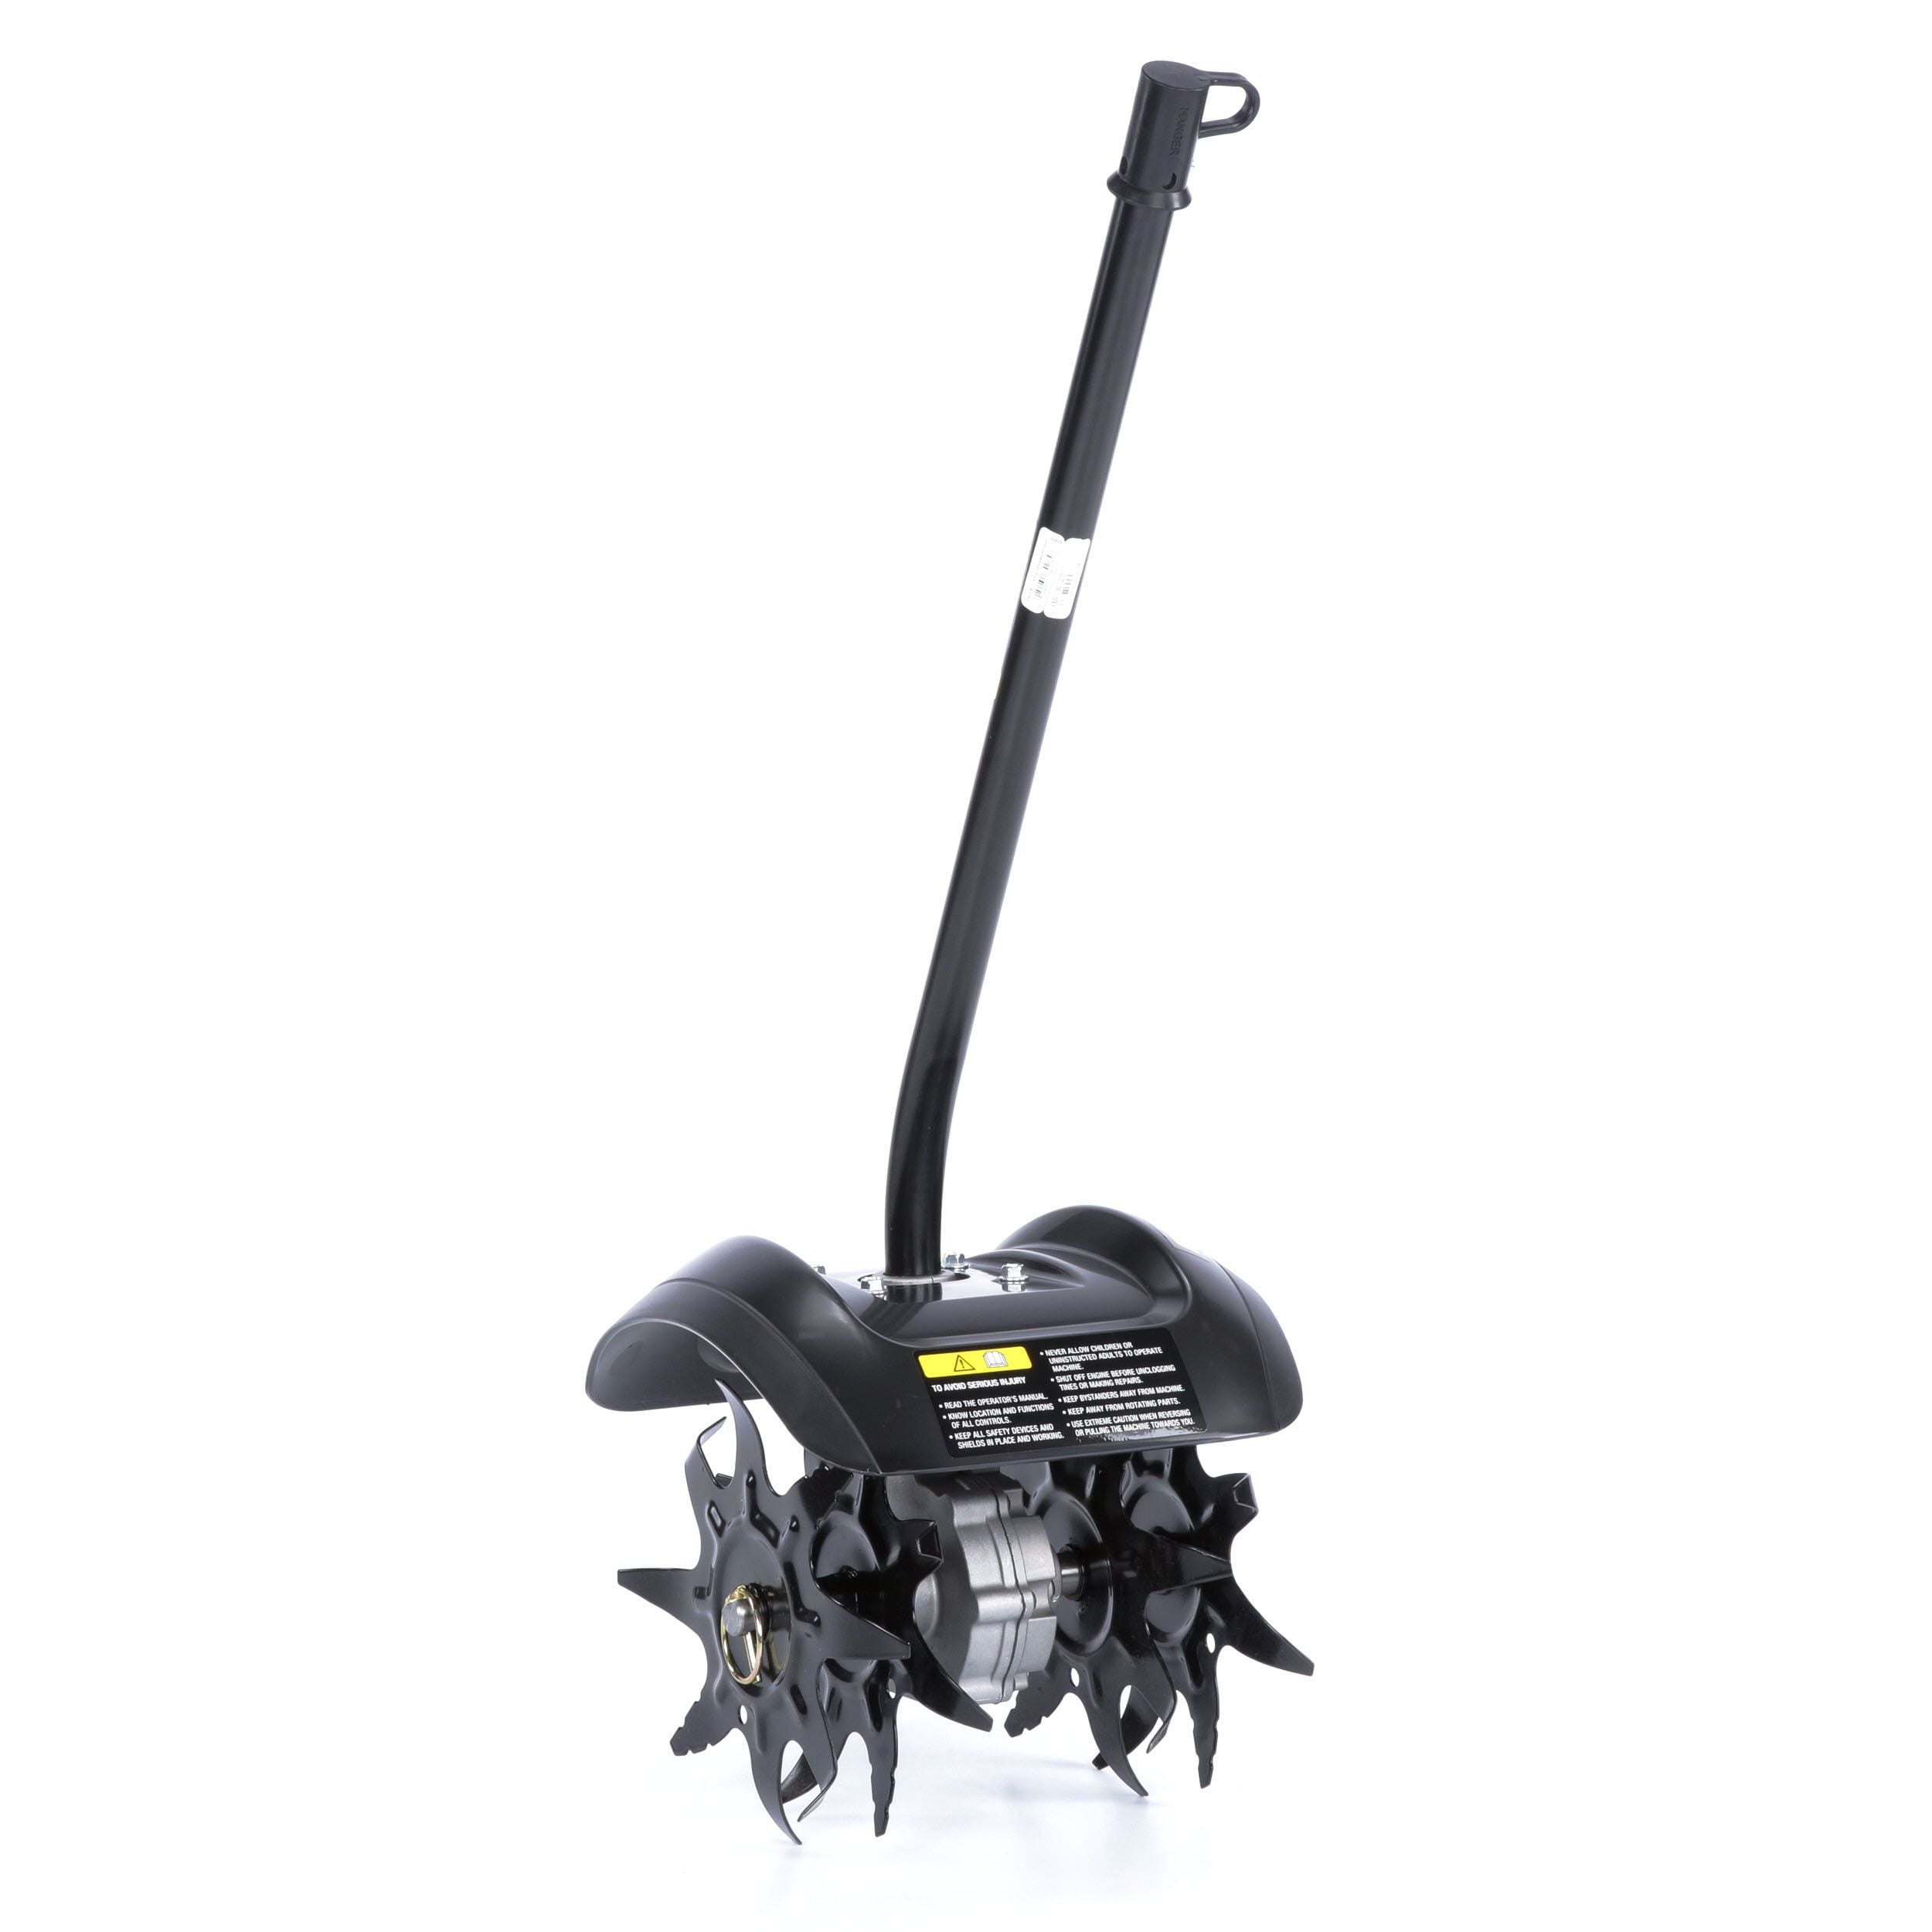 Image of Cultivator attachment for lawnmower lowes